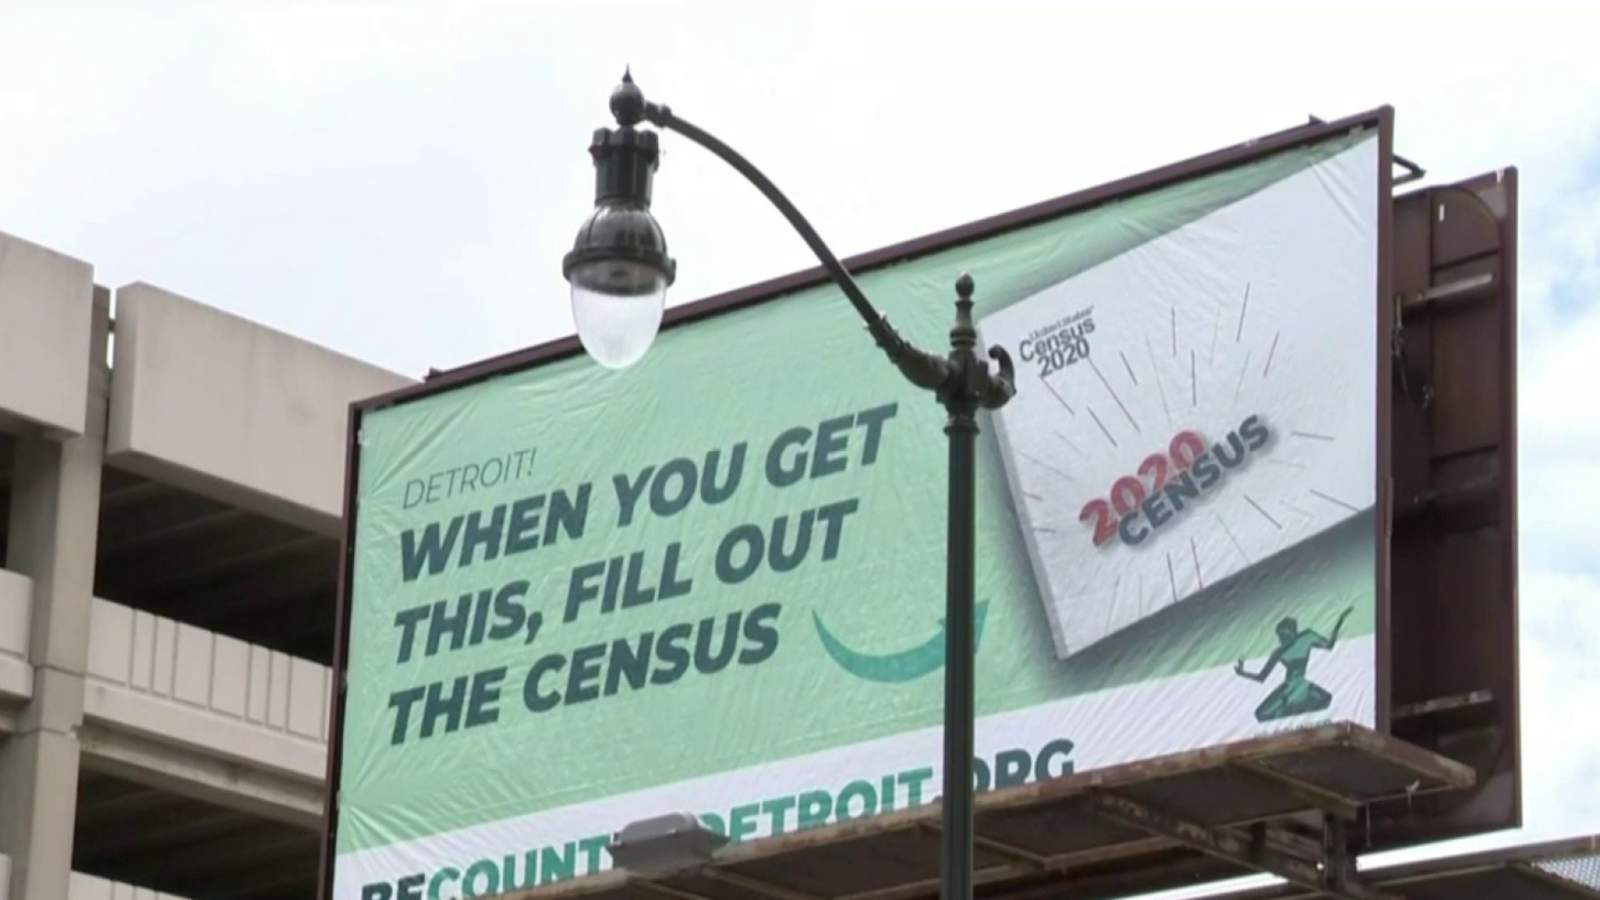 More money for education, health care, roads: Why census is so important in Michigan